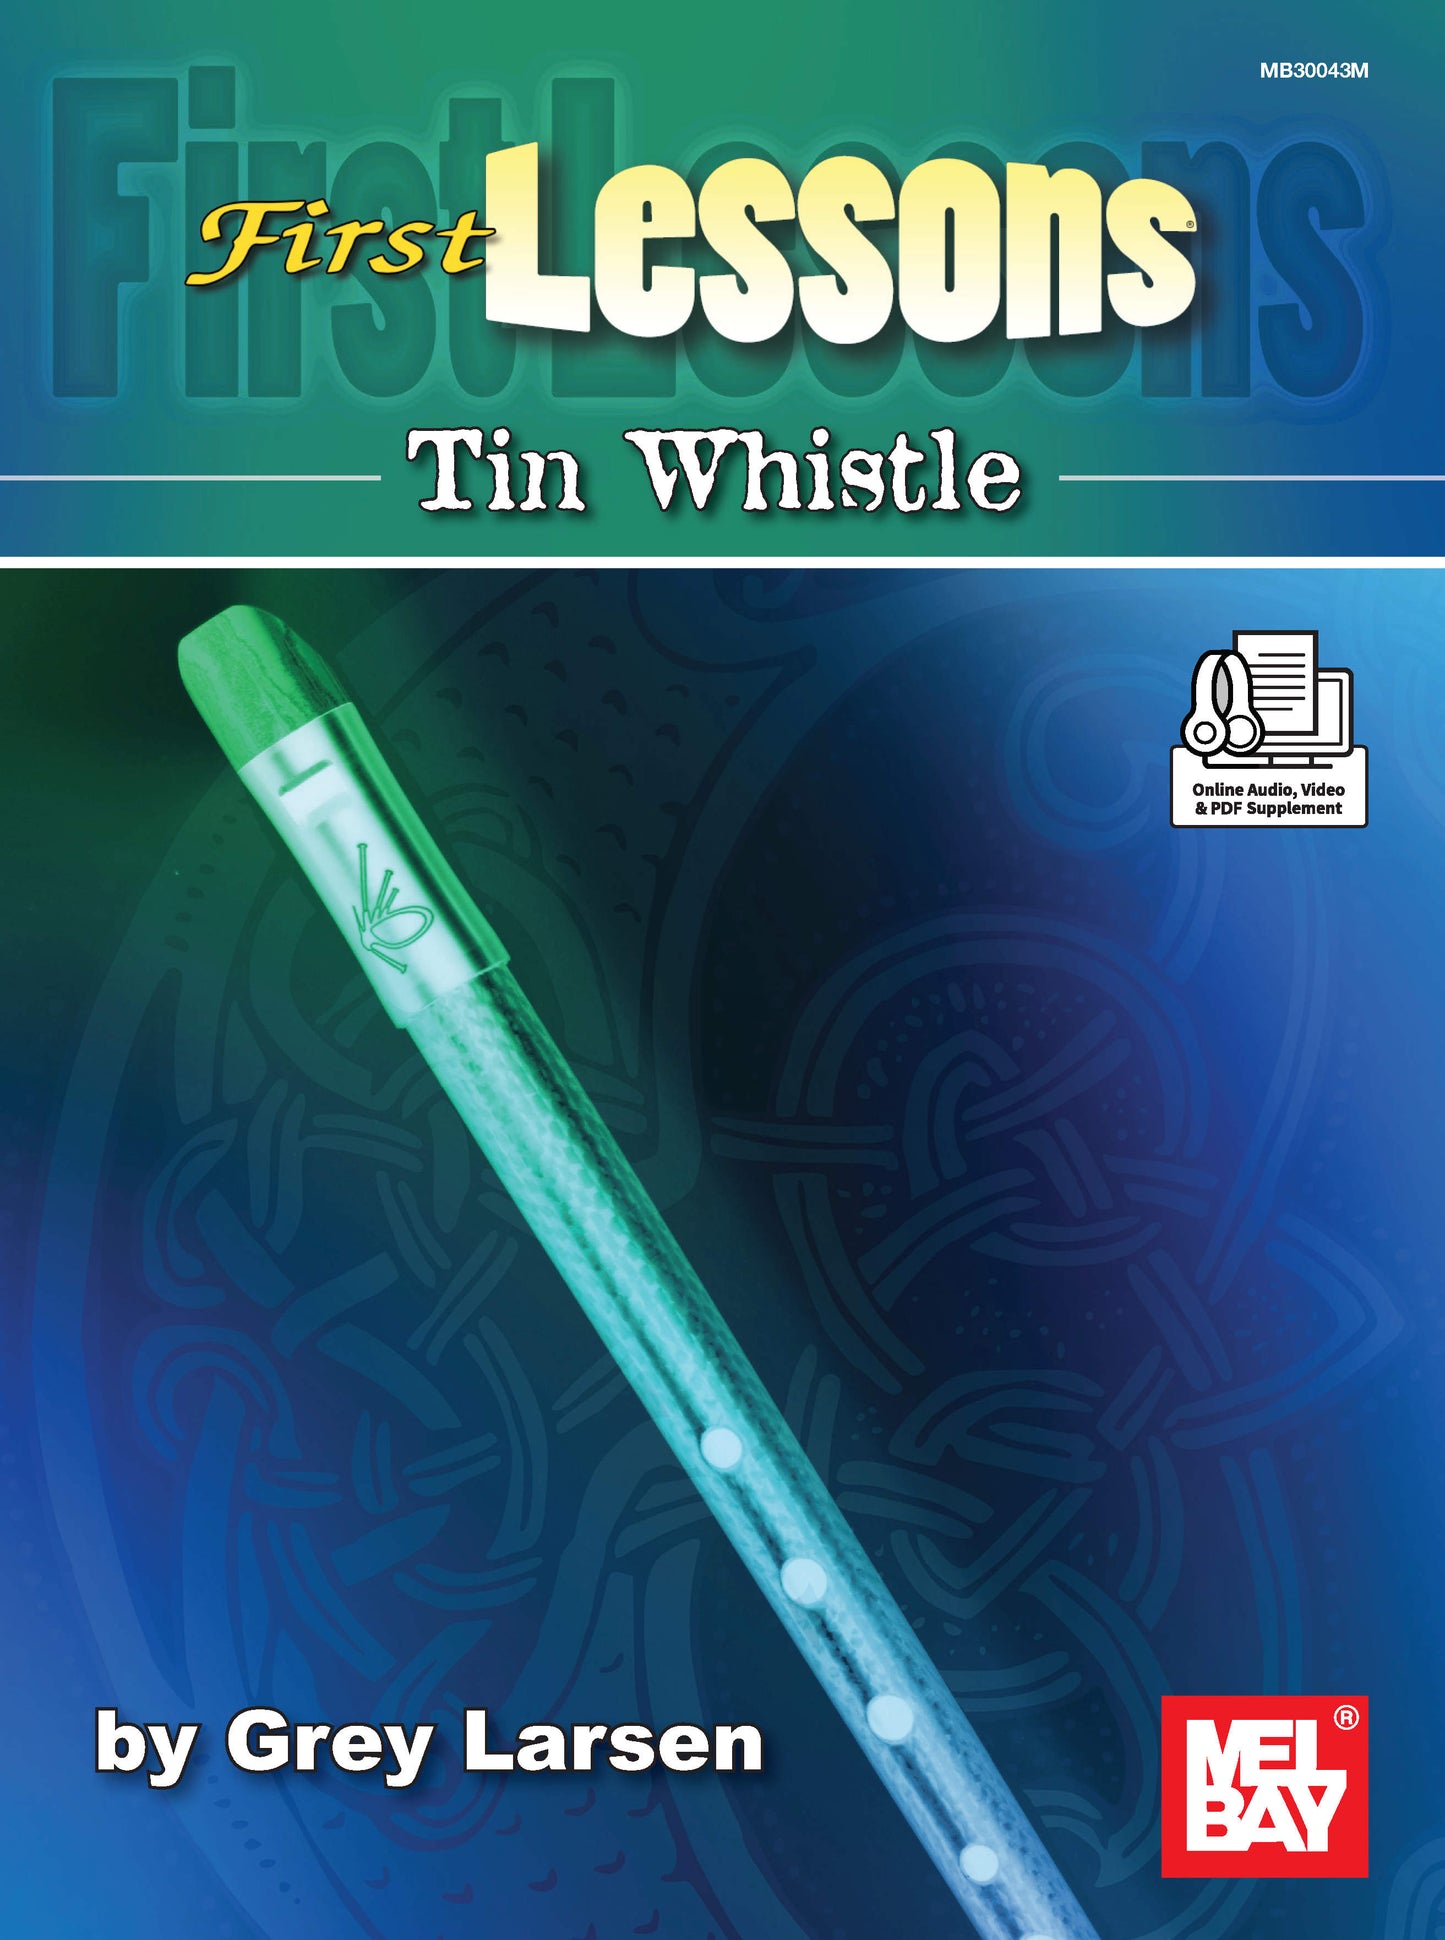 Image 1 of First Lessons Tin Whistle - SKU# 02-30043M : Product Type Media : Elderly Instruments